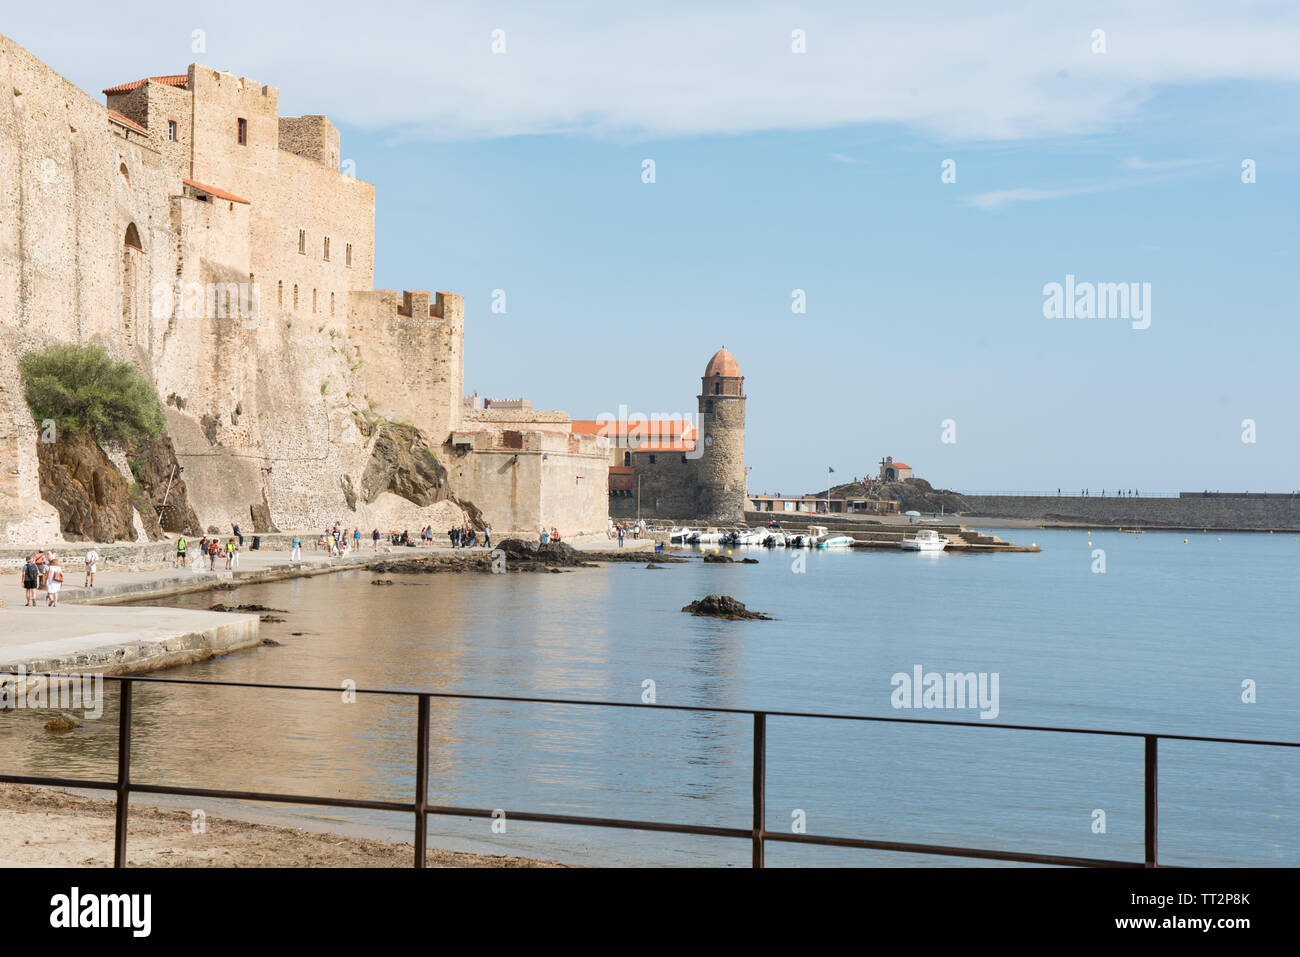 Old town of Collioure, France, a popular resort town on Mediterranean sea, view from the beach. Stock Photo